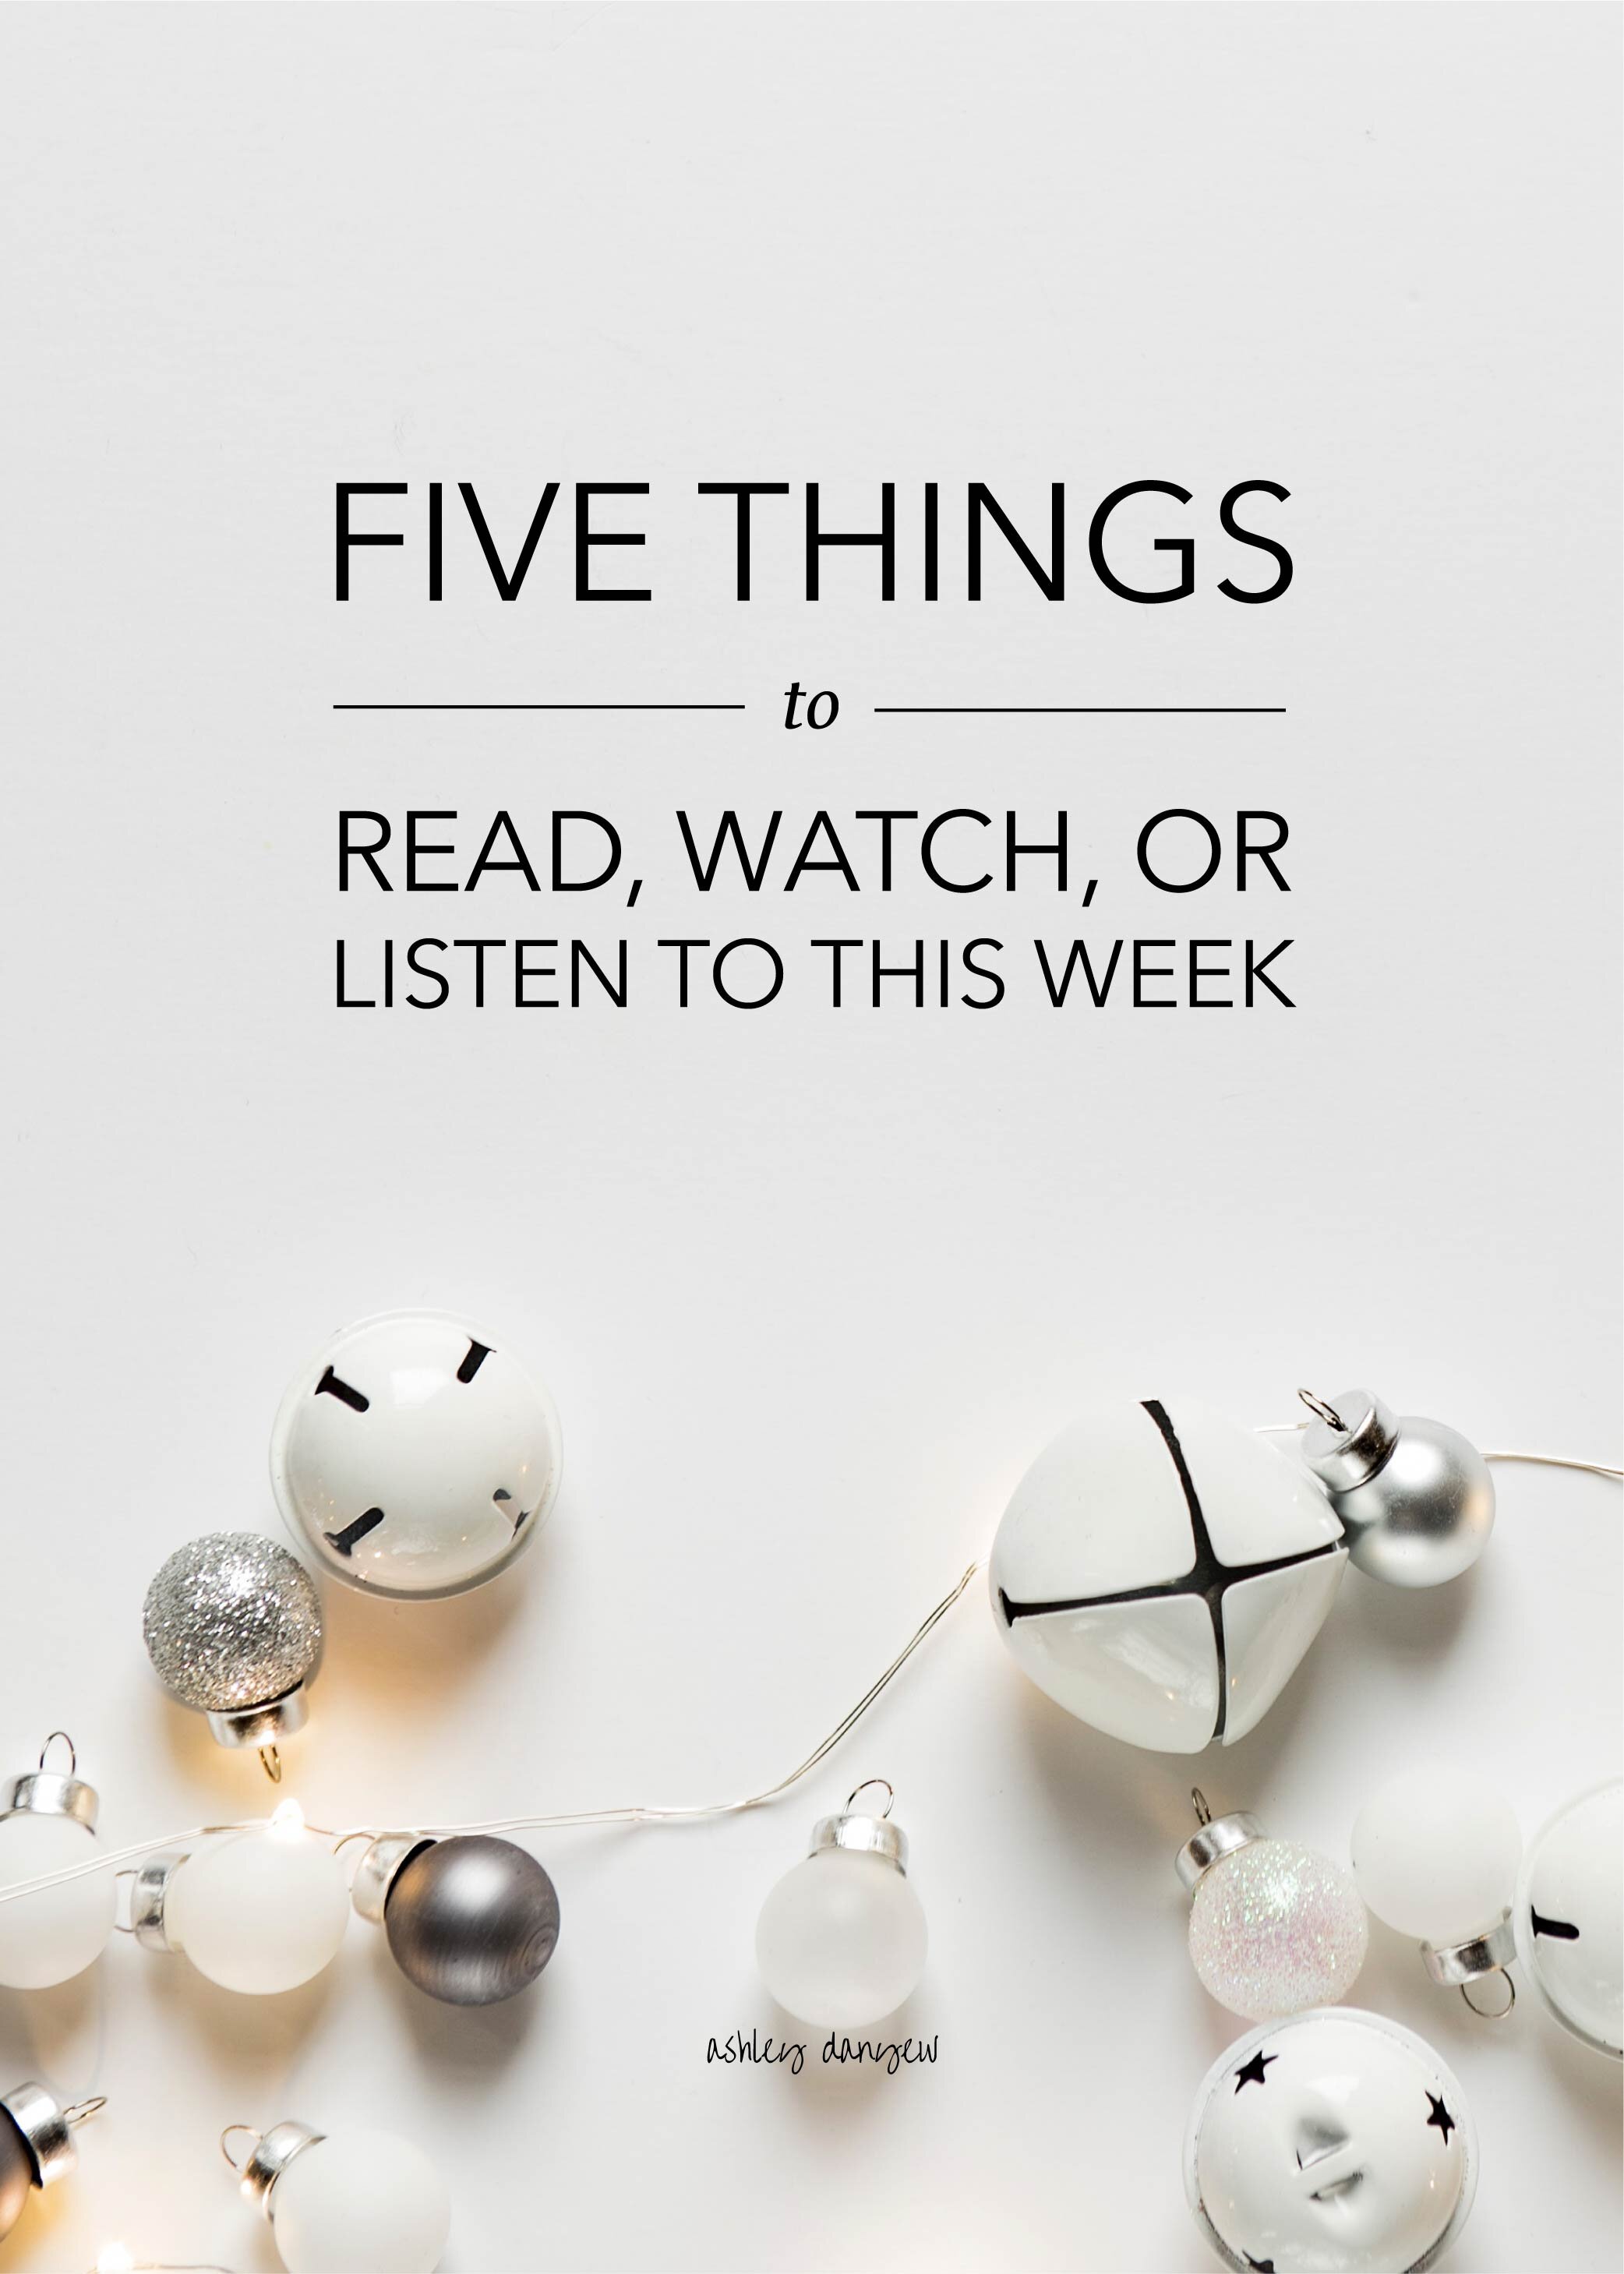 Five Things to Read, Watch, or Listen To This Week